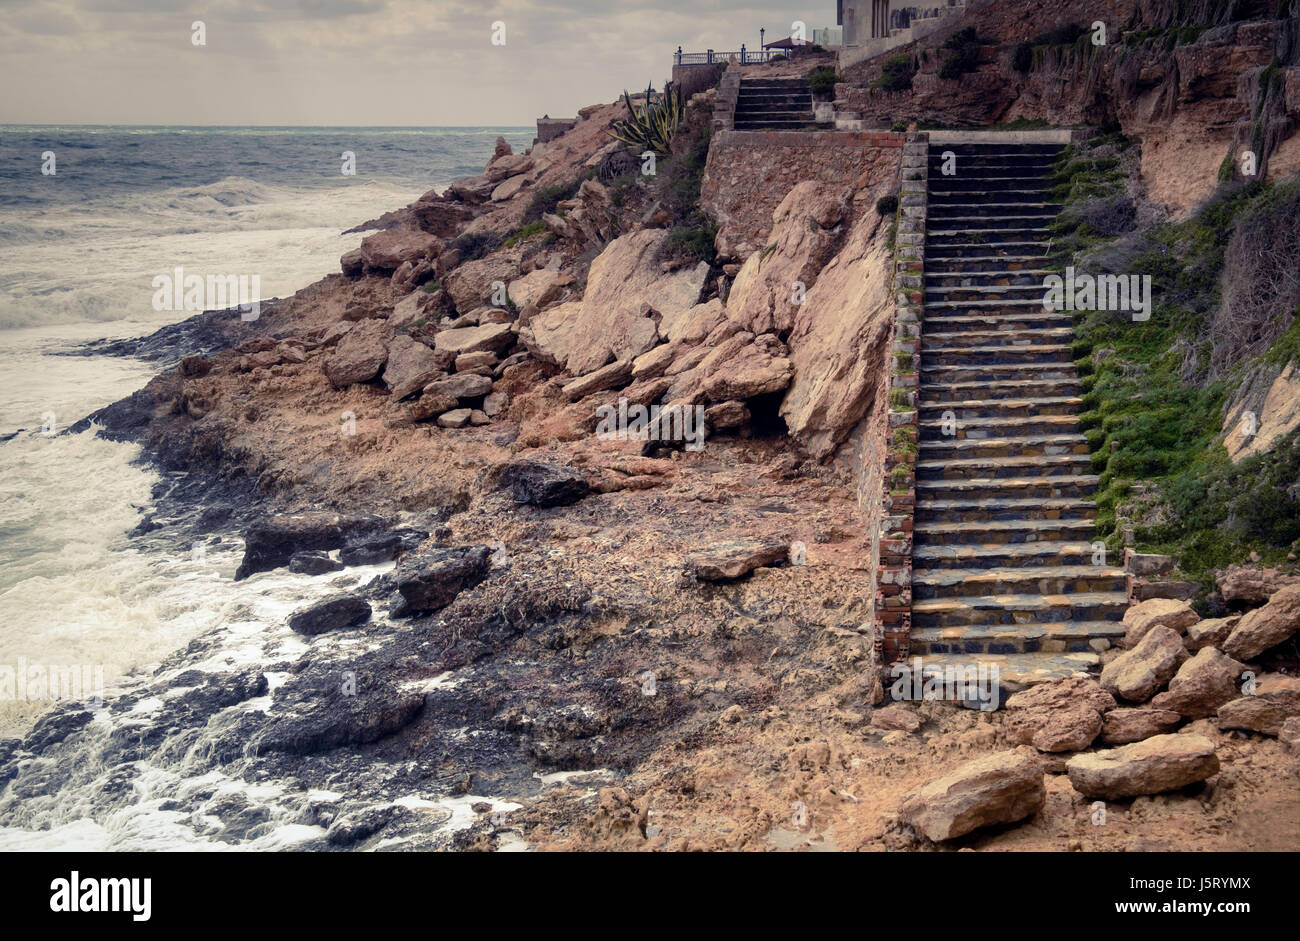 An overcast image of a weathered stairway built into cliff and rocks along the Spanish coastline. Stock Photo